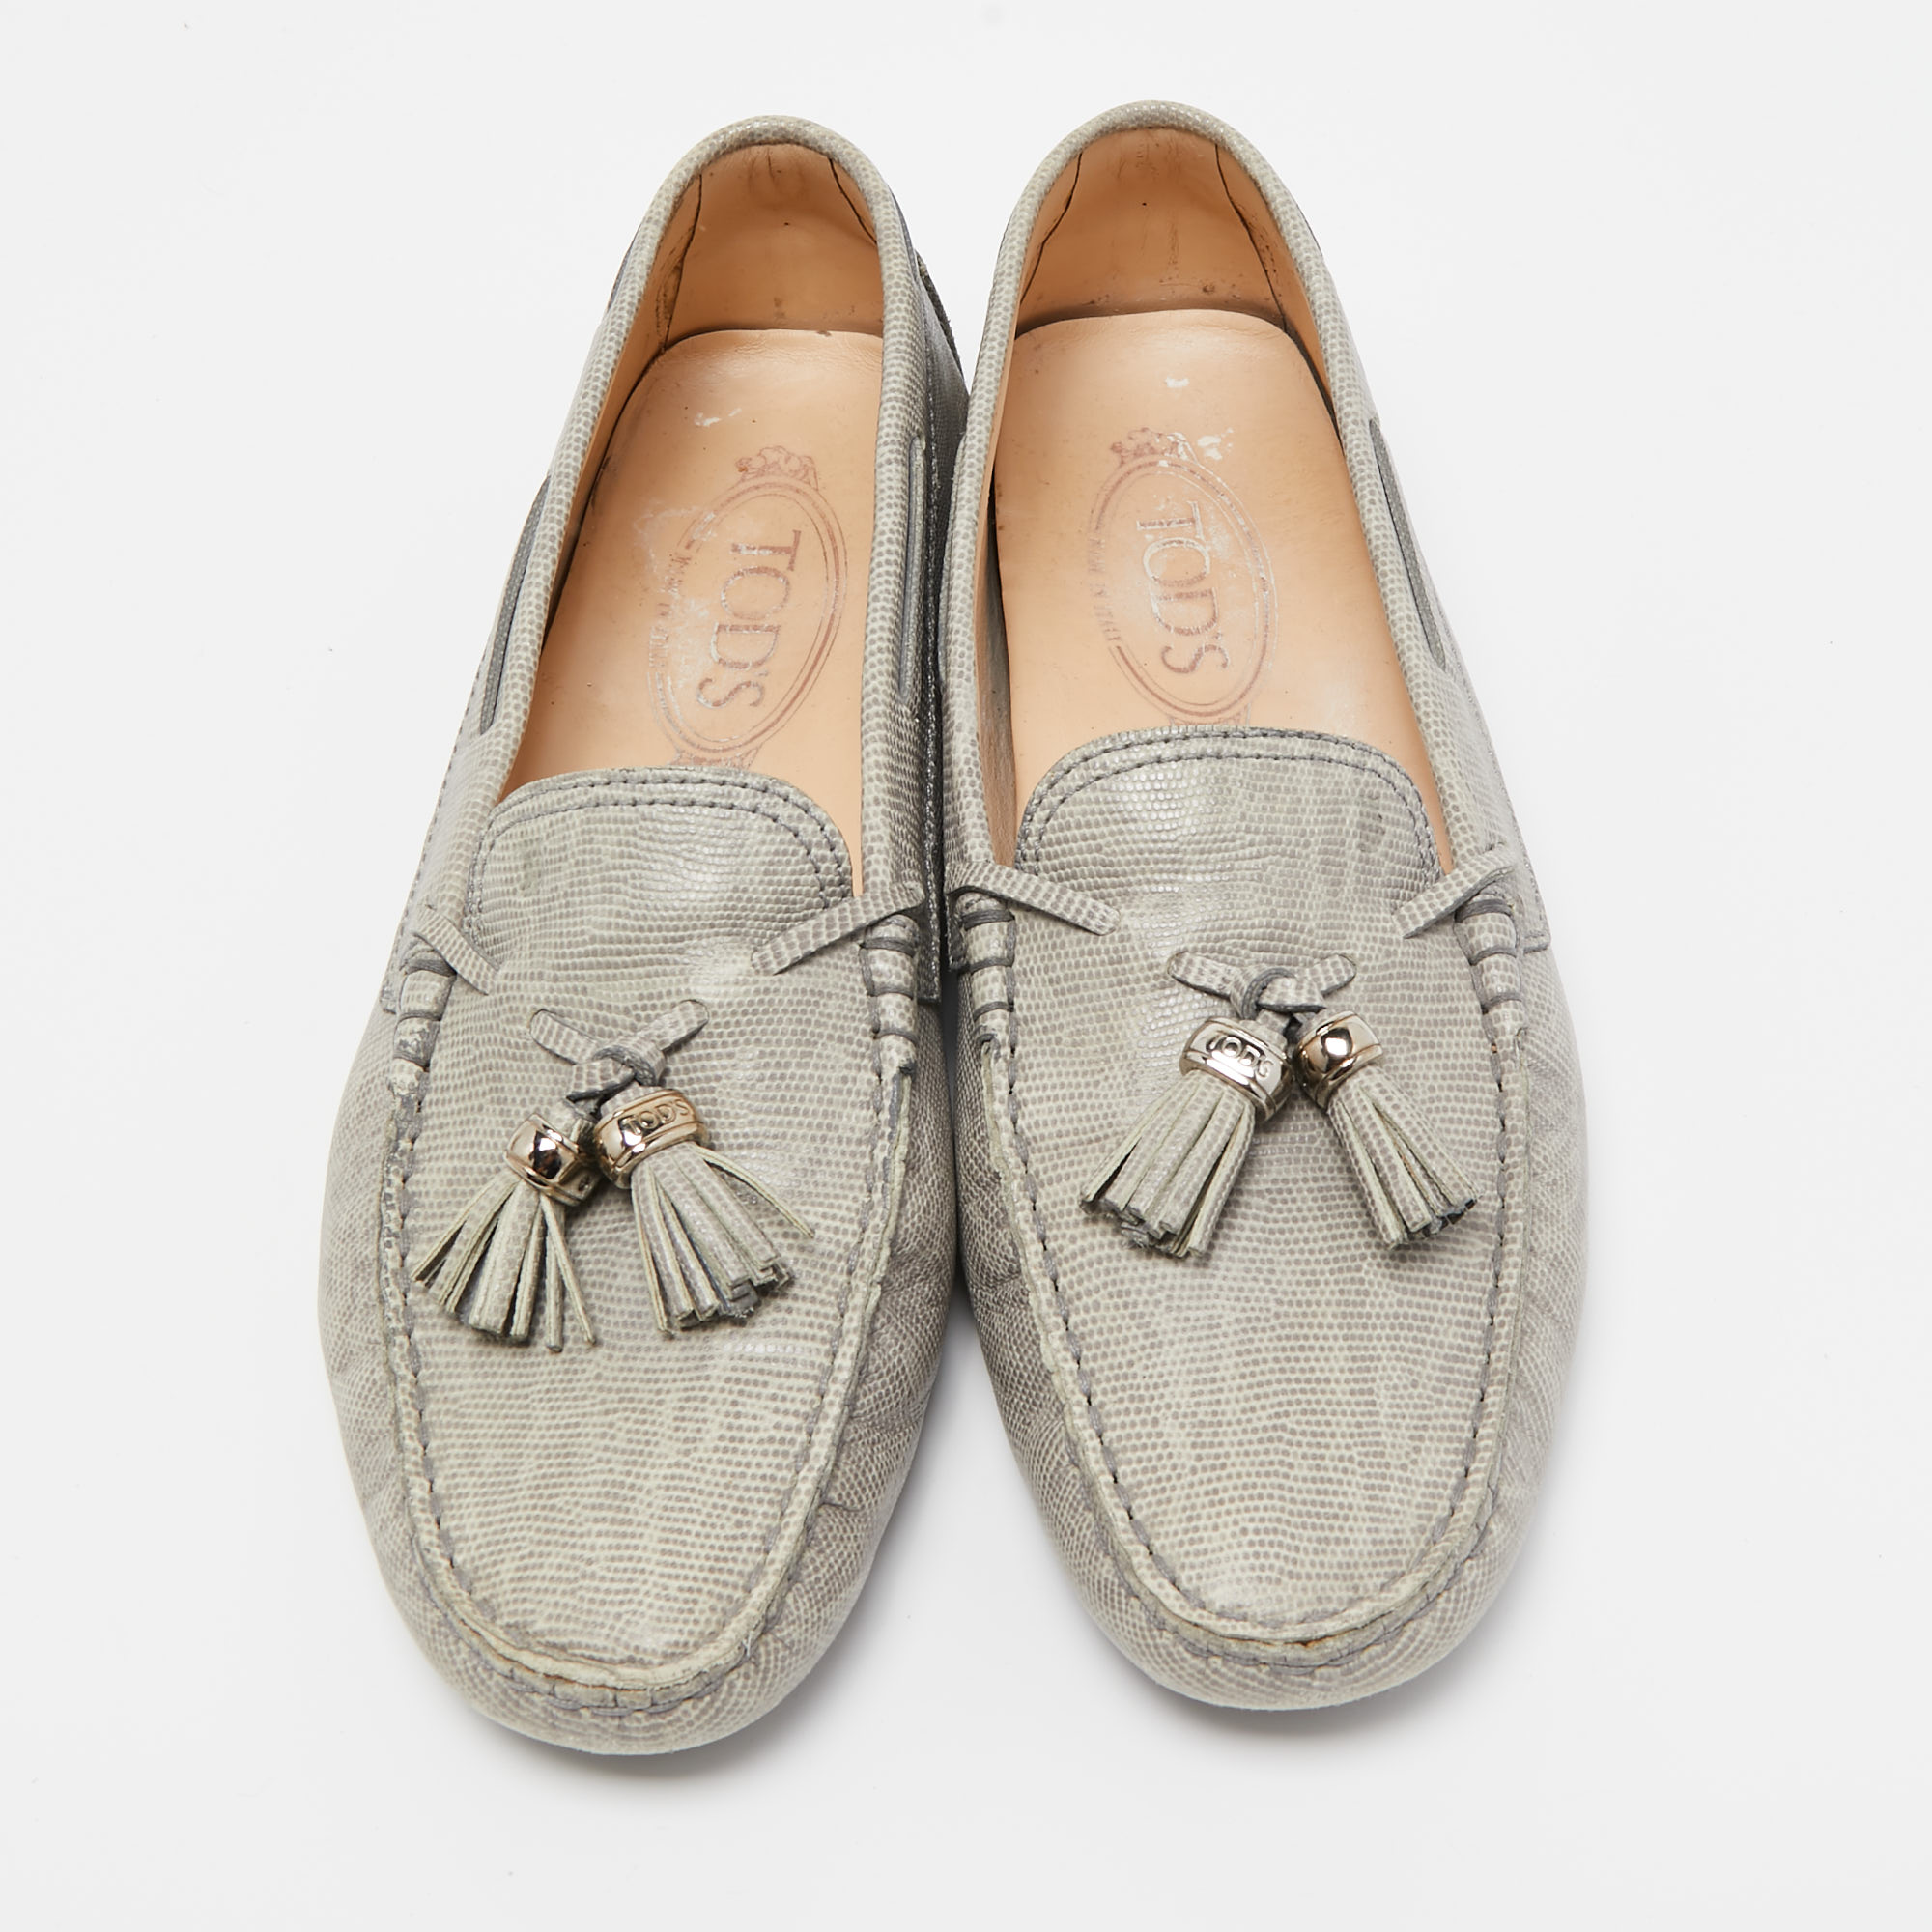 Tod's Grey Lizard Embossed Bow Slip On Loafers Size 39